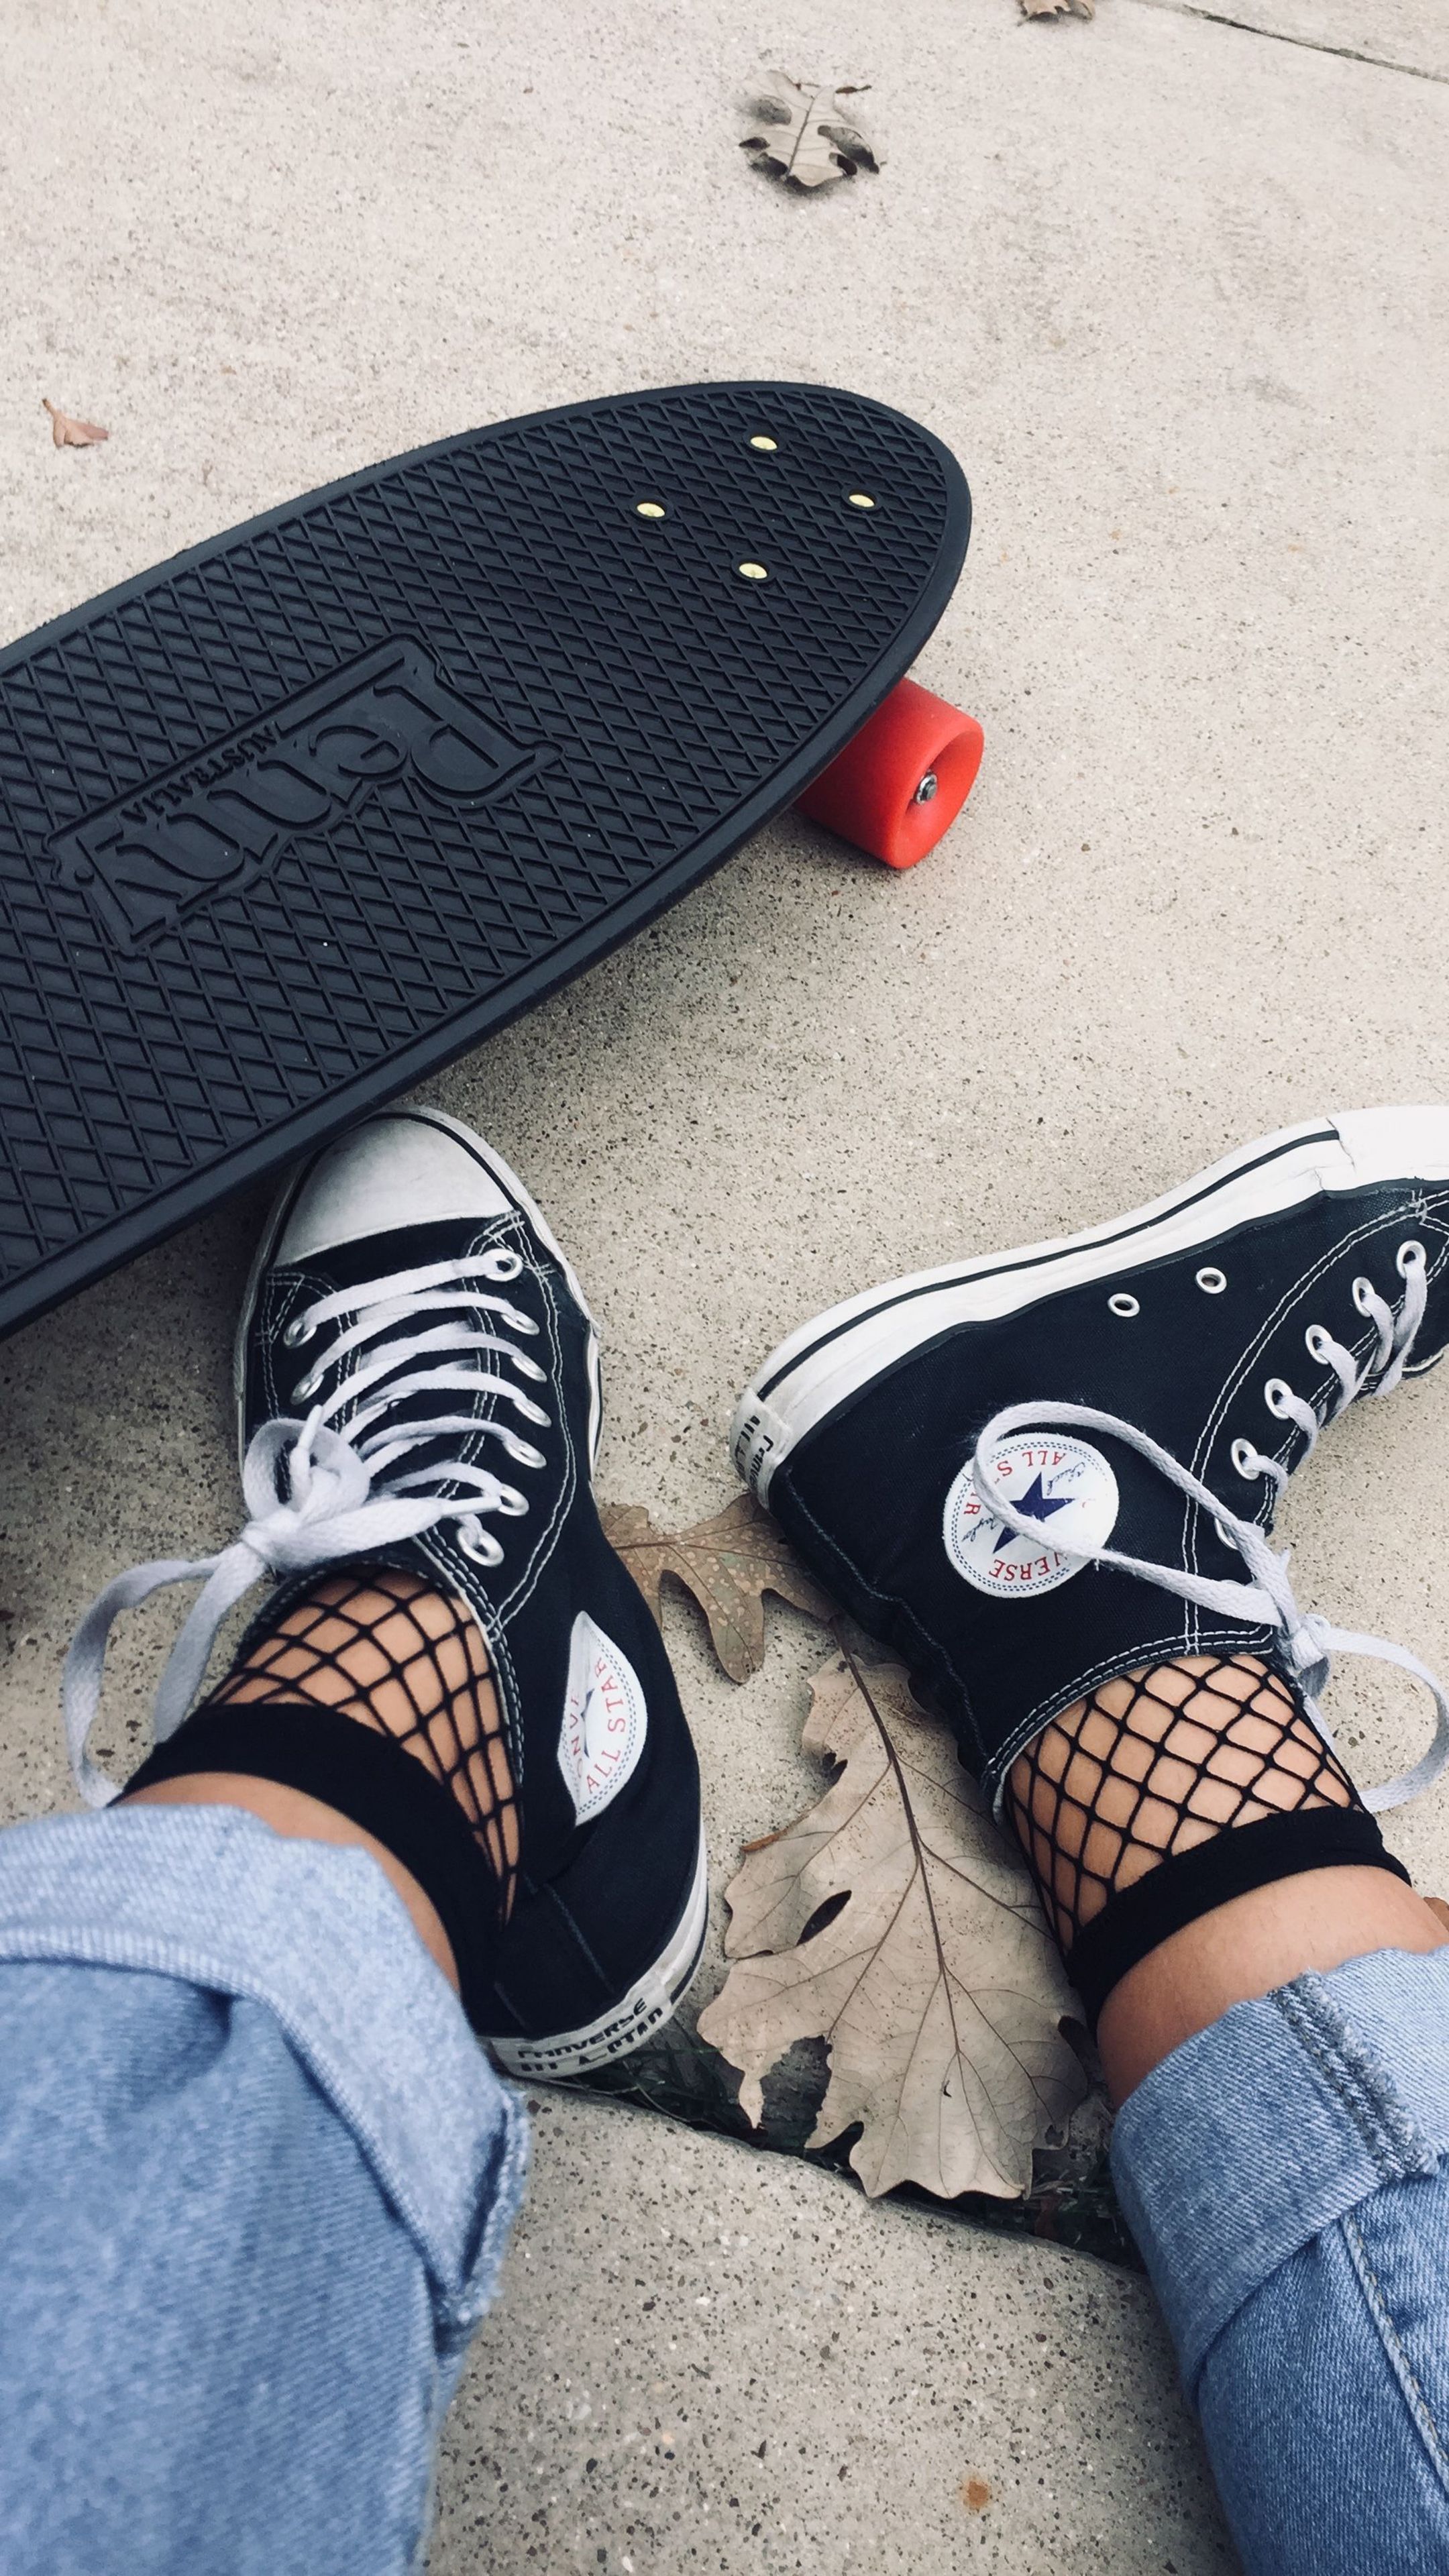 A girl wearing fishnet socks and converse sneakers standing next to a skateboard - Shoes